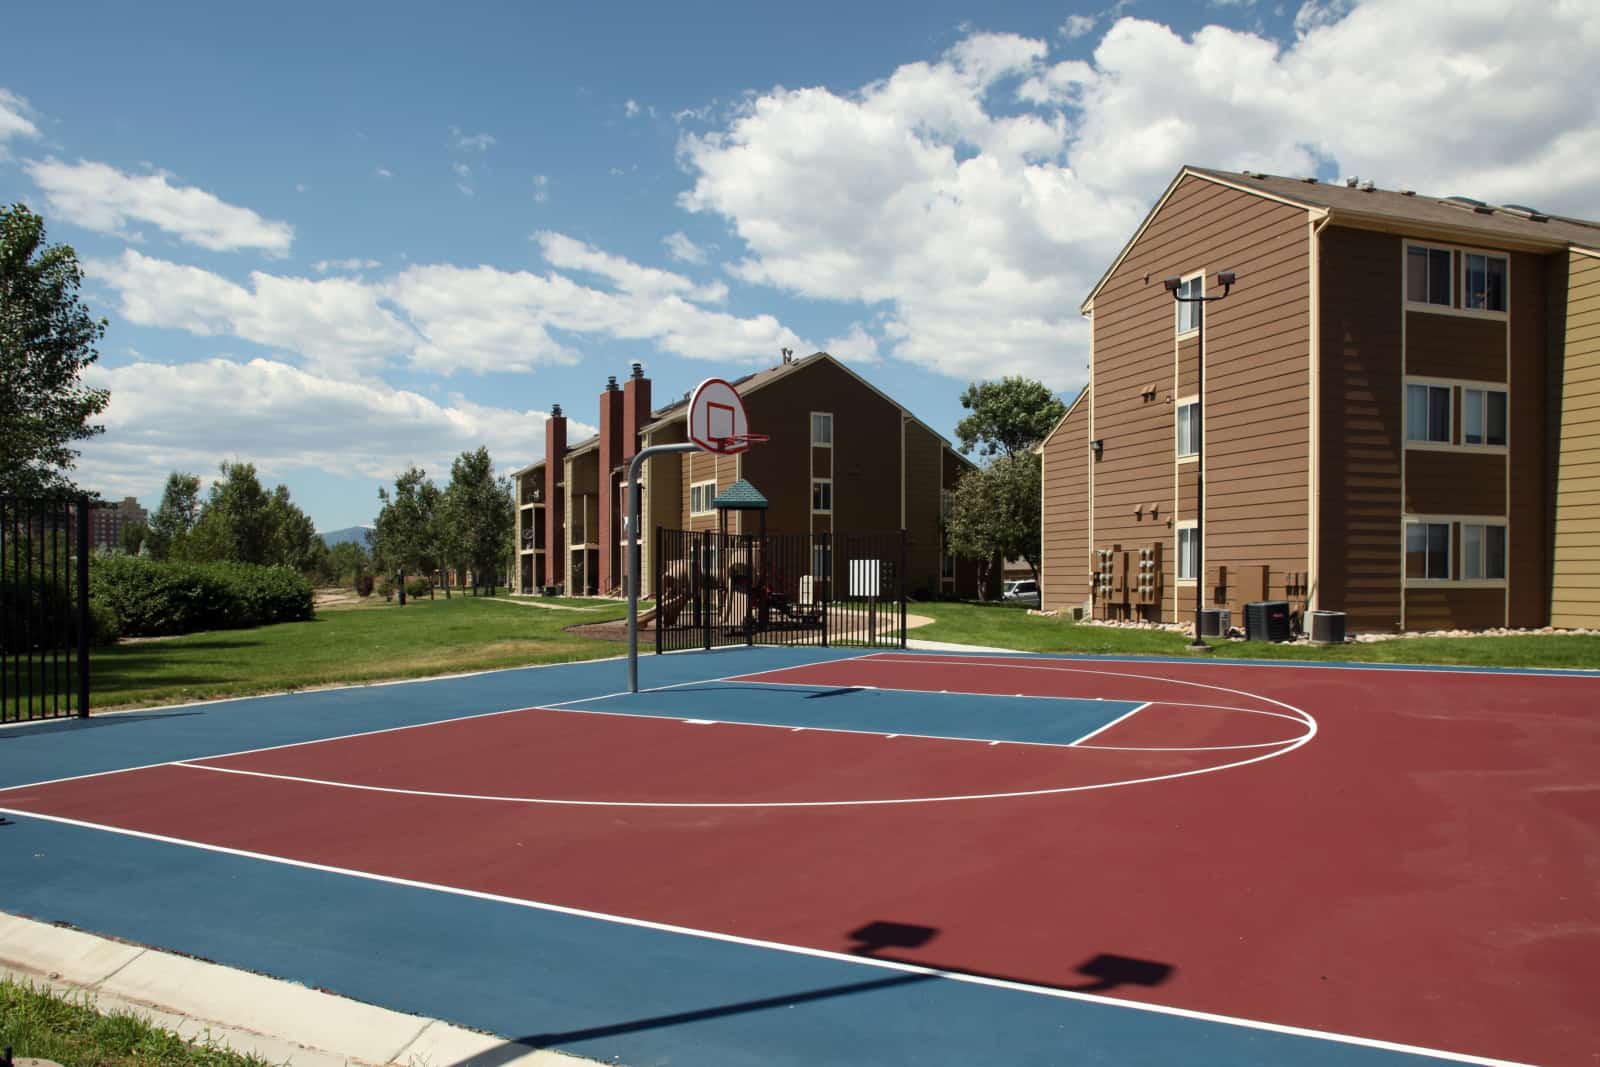 Basketball court with apartment building in the background.